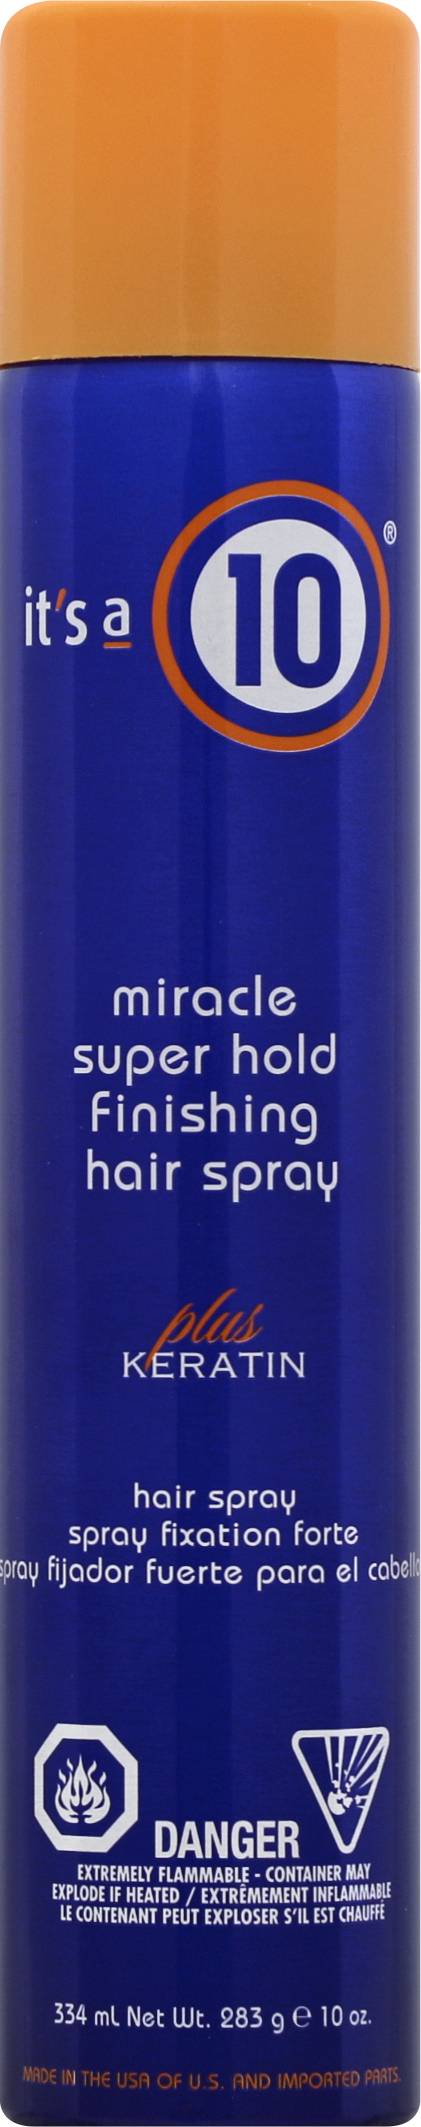 It's a 10 Miracle Super Hold Finishing Hair Spray (10 oz)